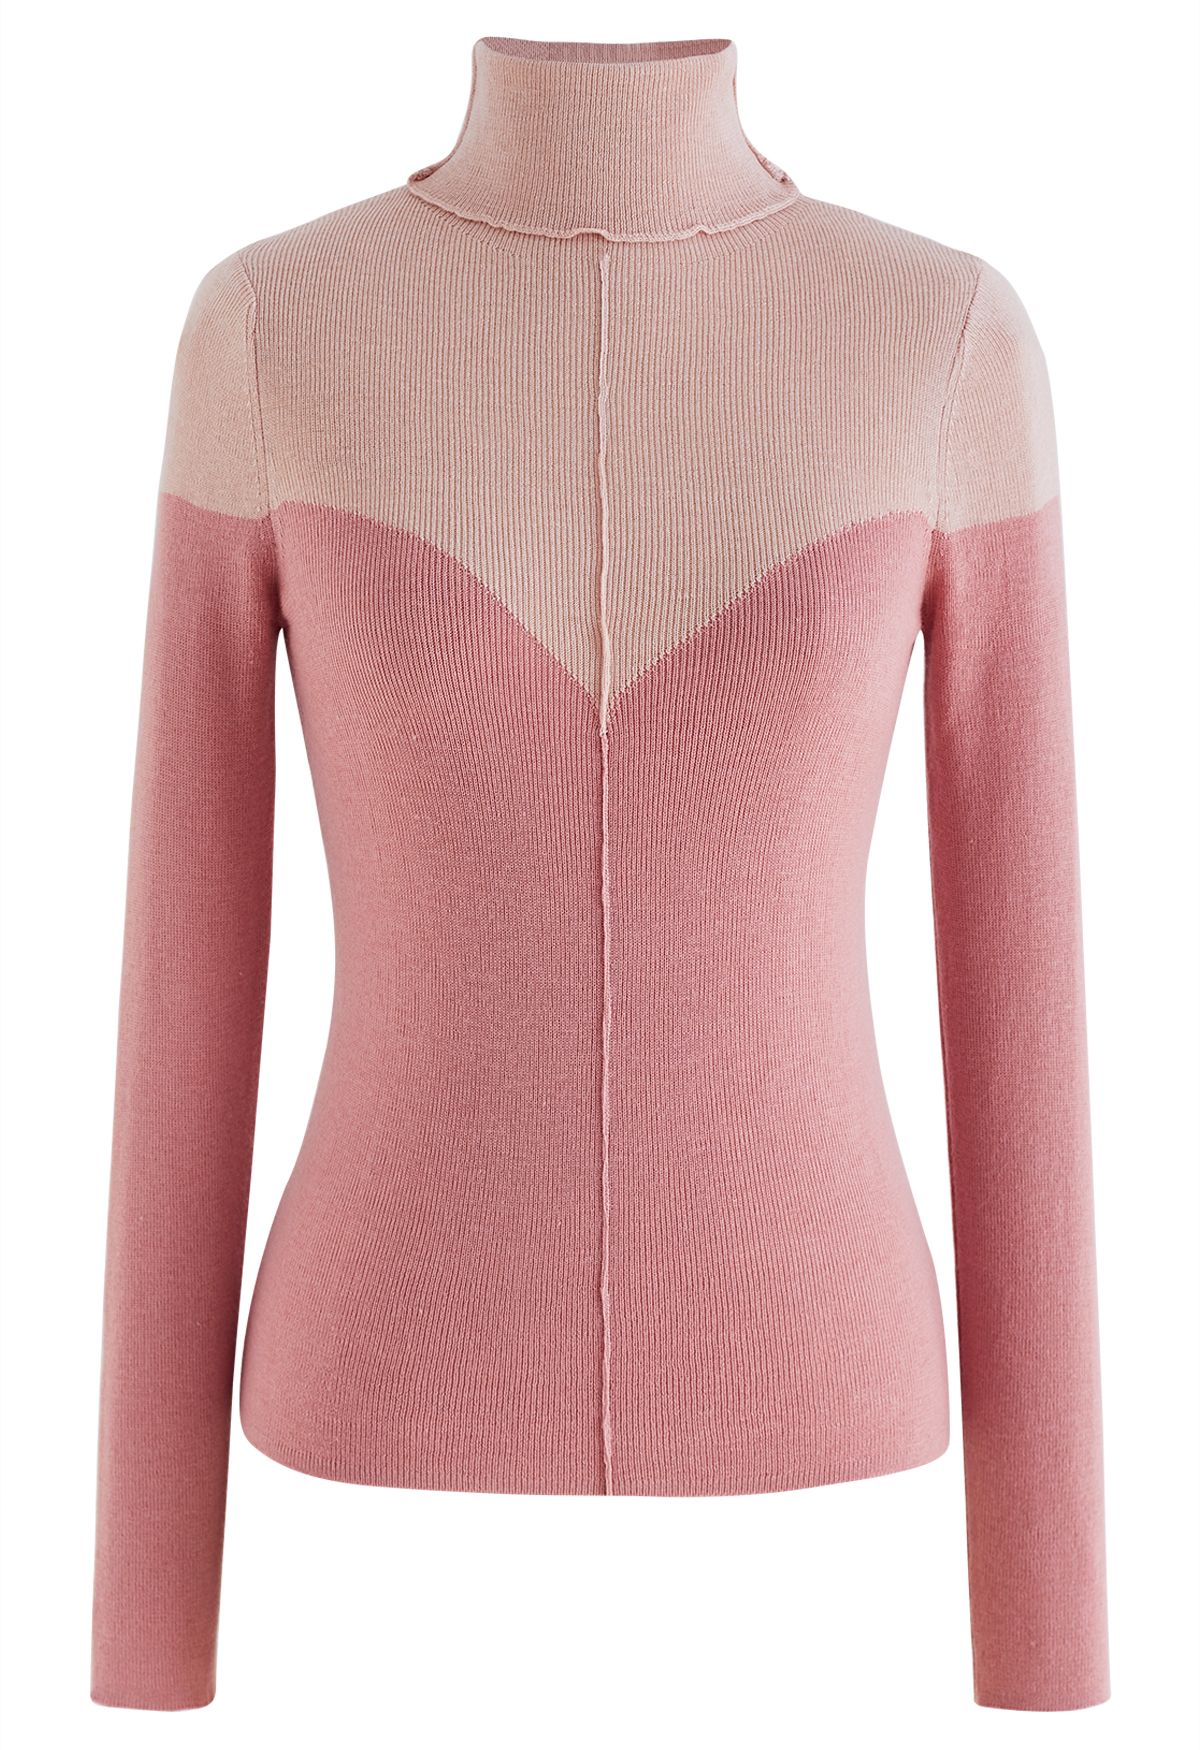 Turtleneck Two-Tone Fitted Knit Top in Pink - Retro, Indie and Unique ...